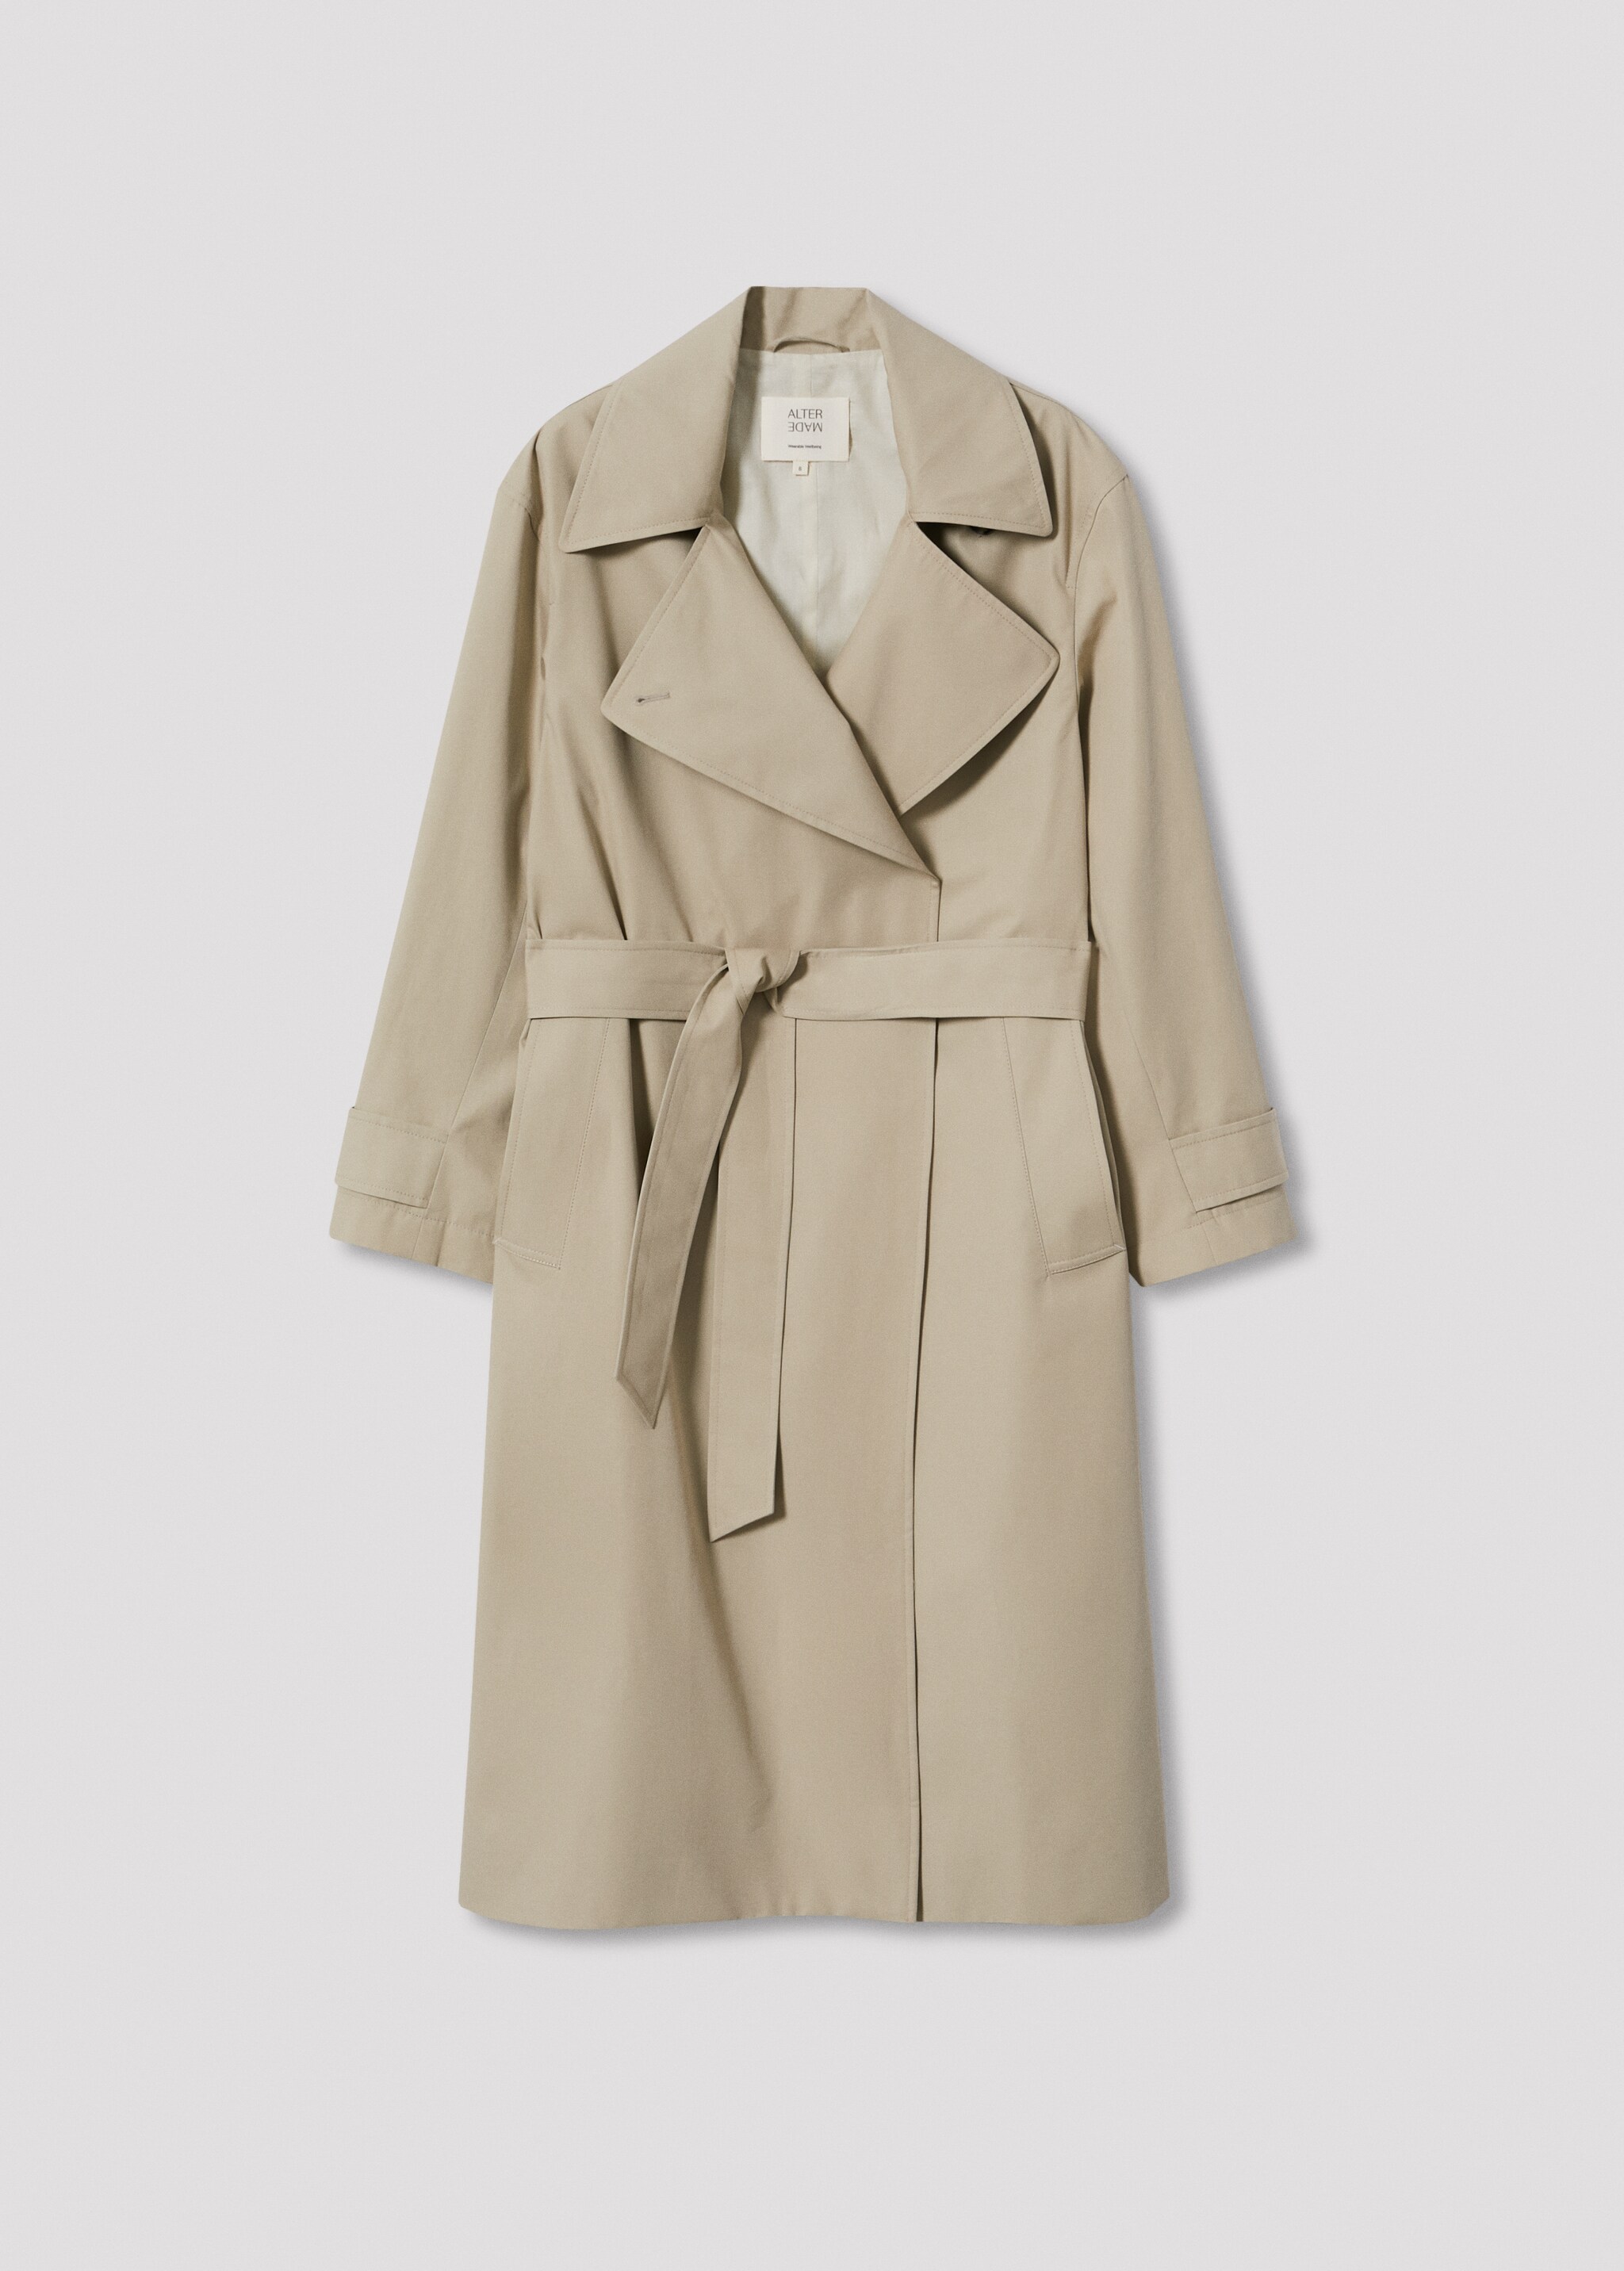 Cotton lapel trench - Article without model